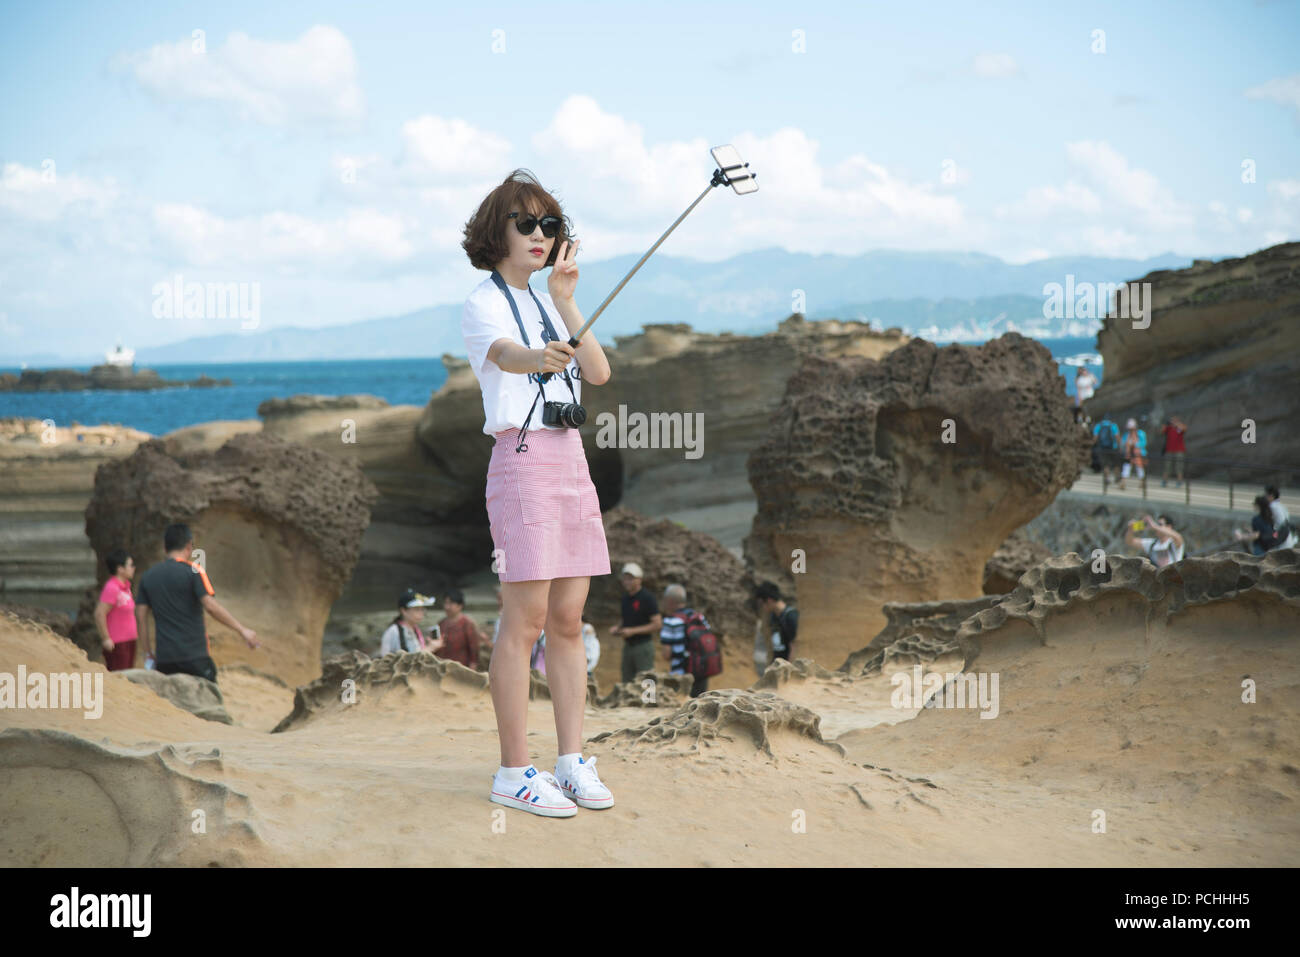 Chinese girl with sunglasses and a Bob haircut, wearing white sneakers, taking a selfie with a selfie stick in a geopark, with the sea in the back. Stock Photo